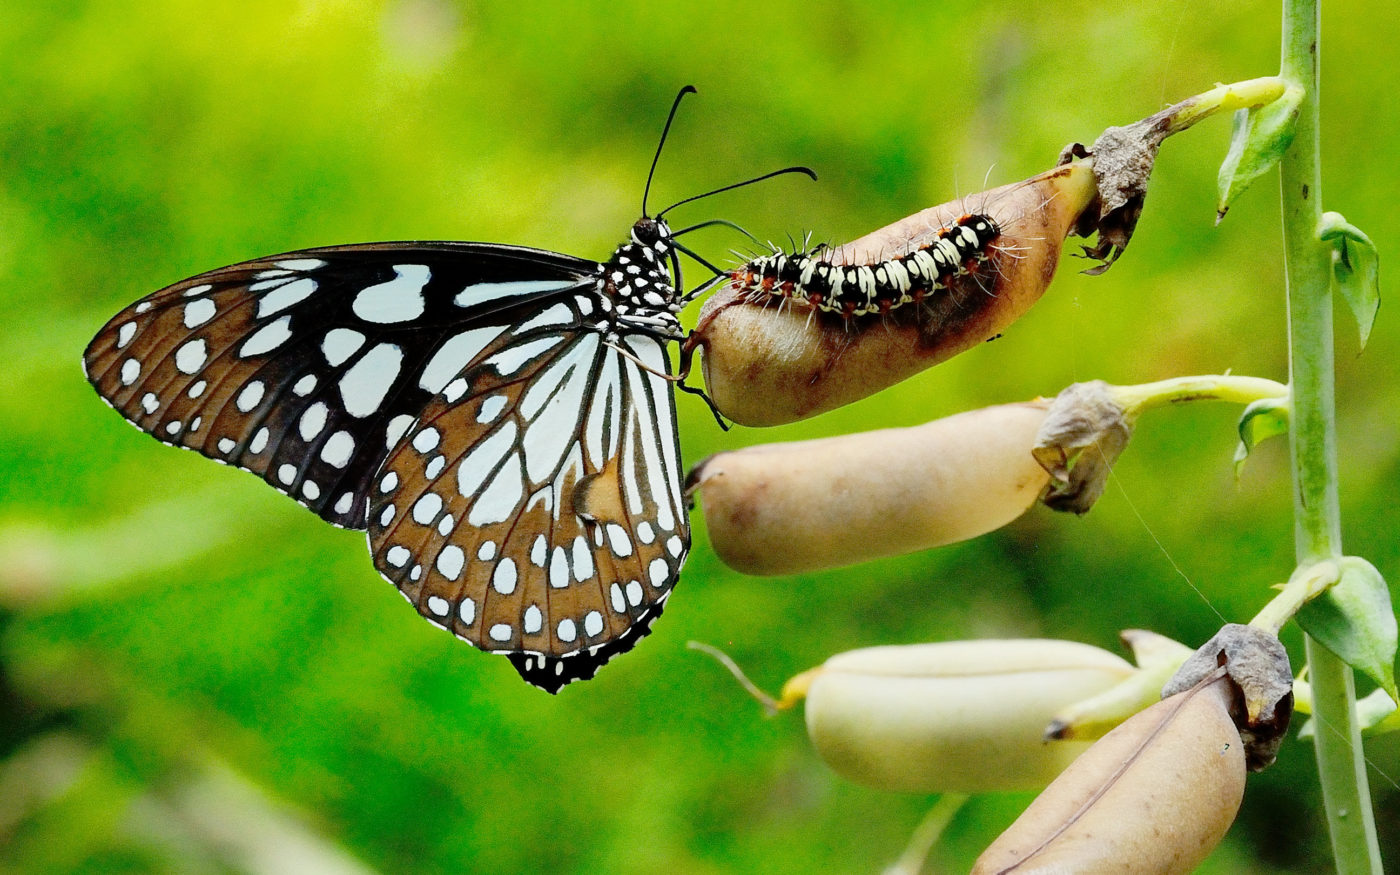 This photograph of an adult butterfly and a moth caterpillar on a legume pod was taken in a botanical garden in Howrah in early April 2014.